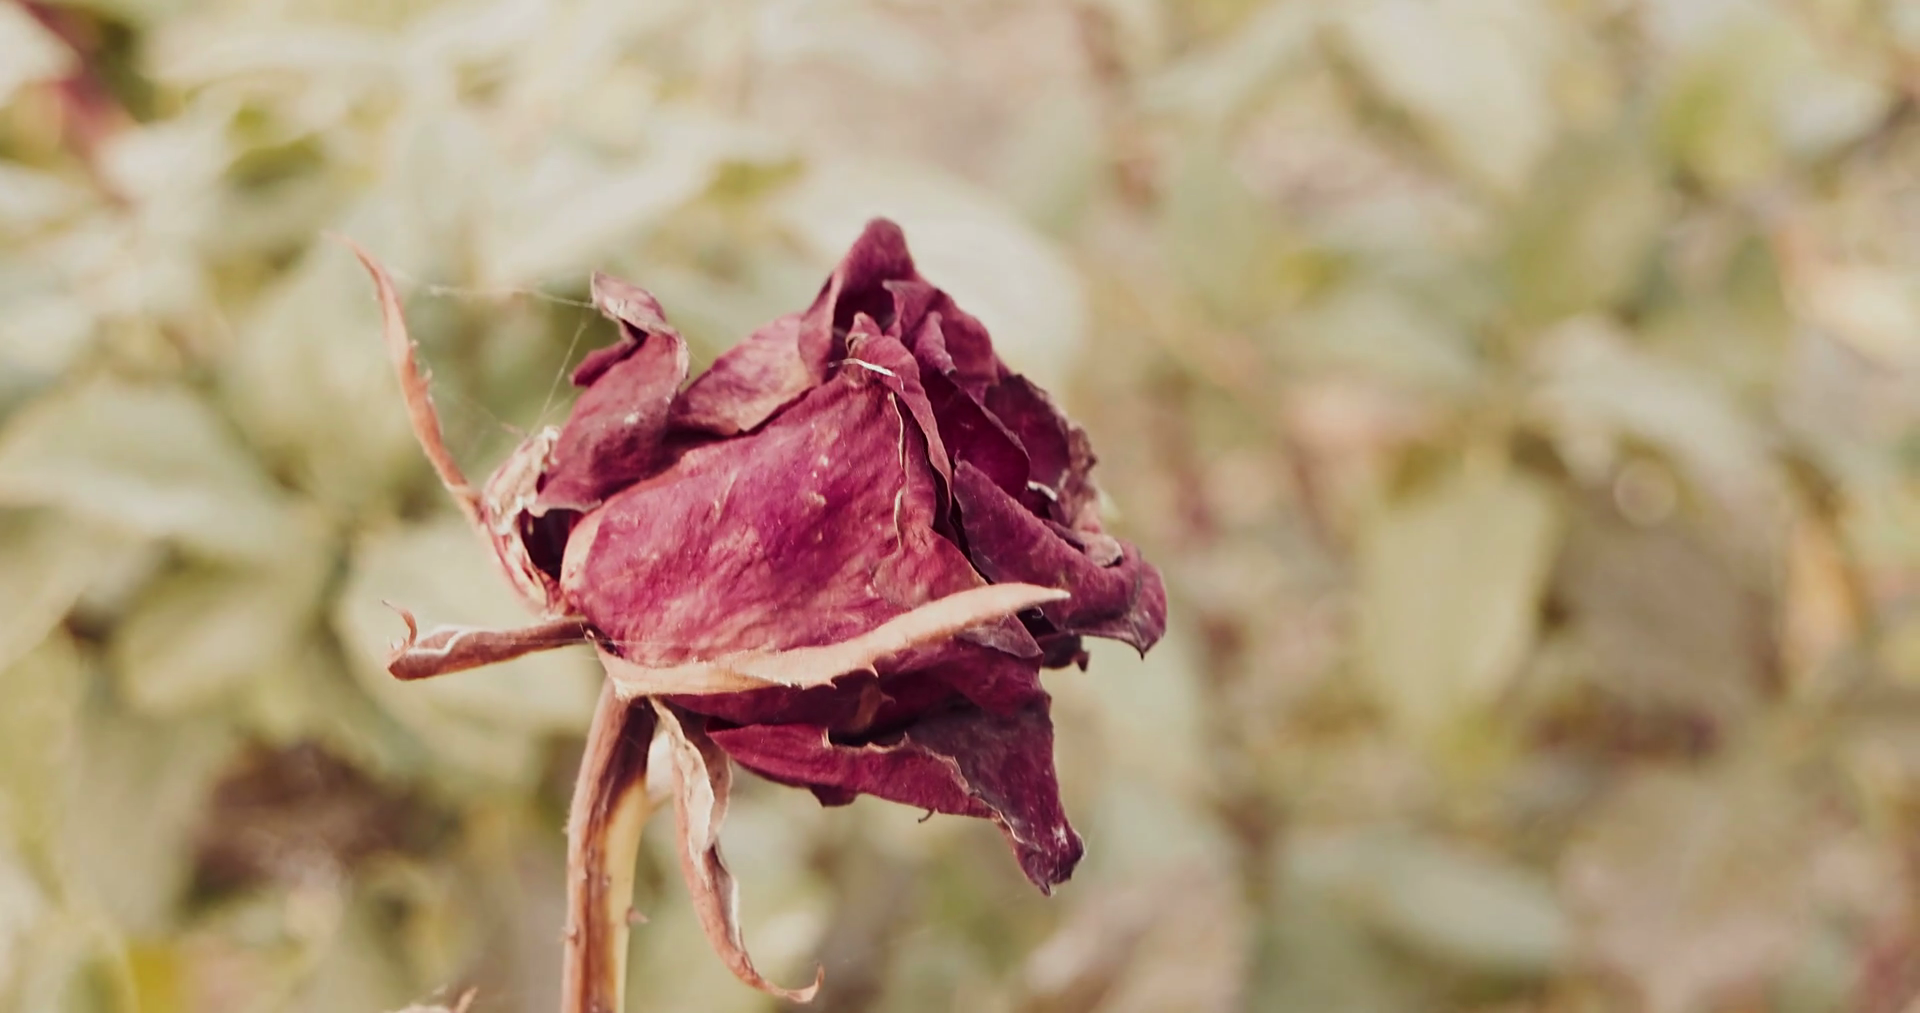 Dying flowers photo